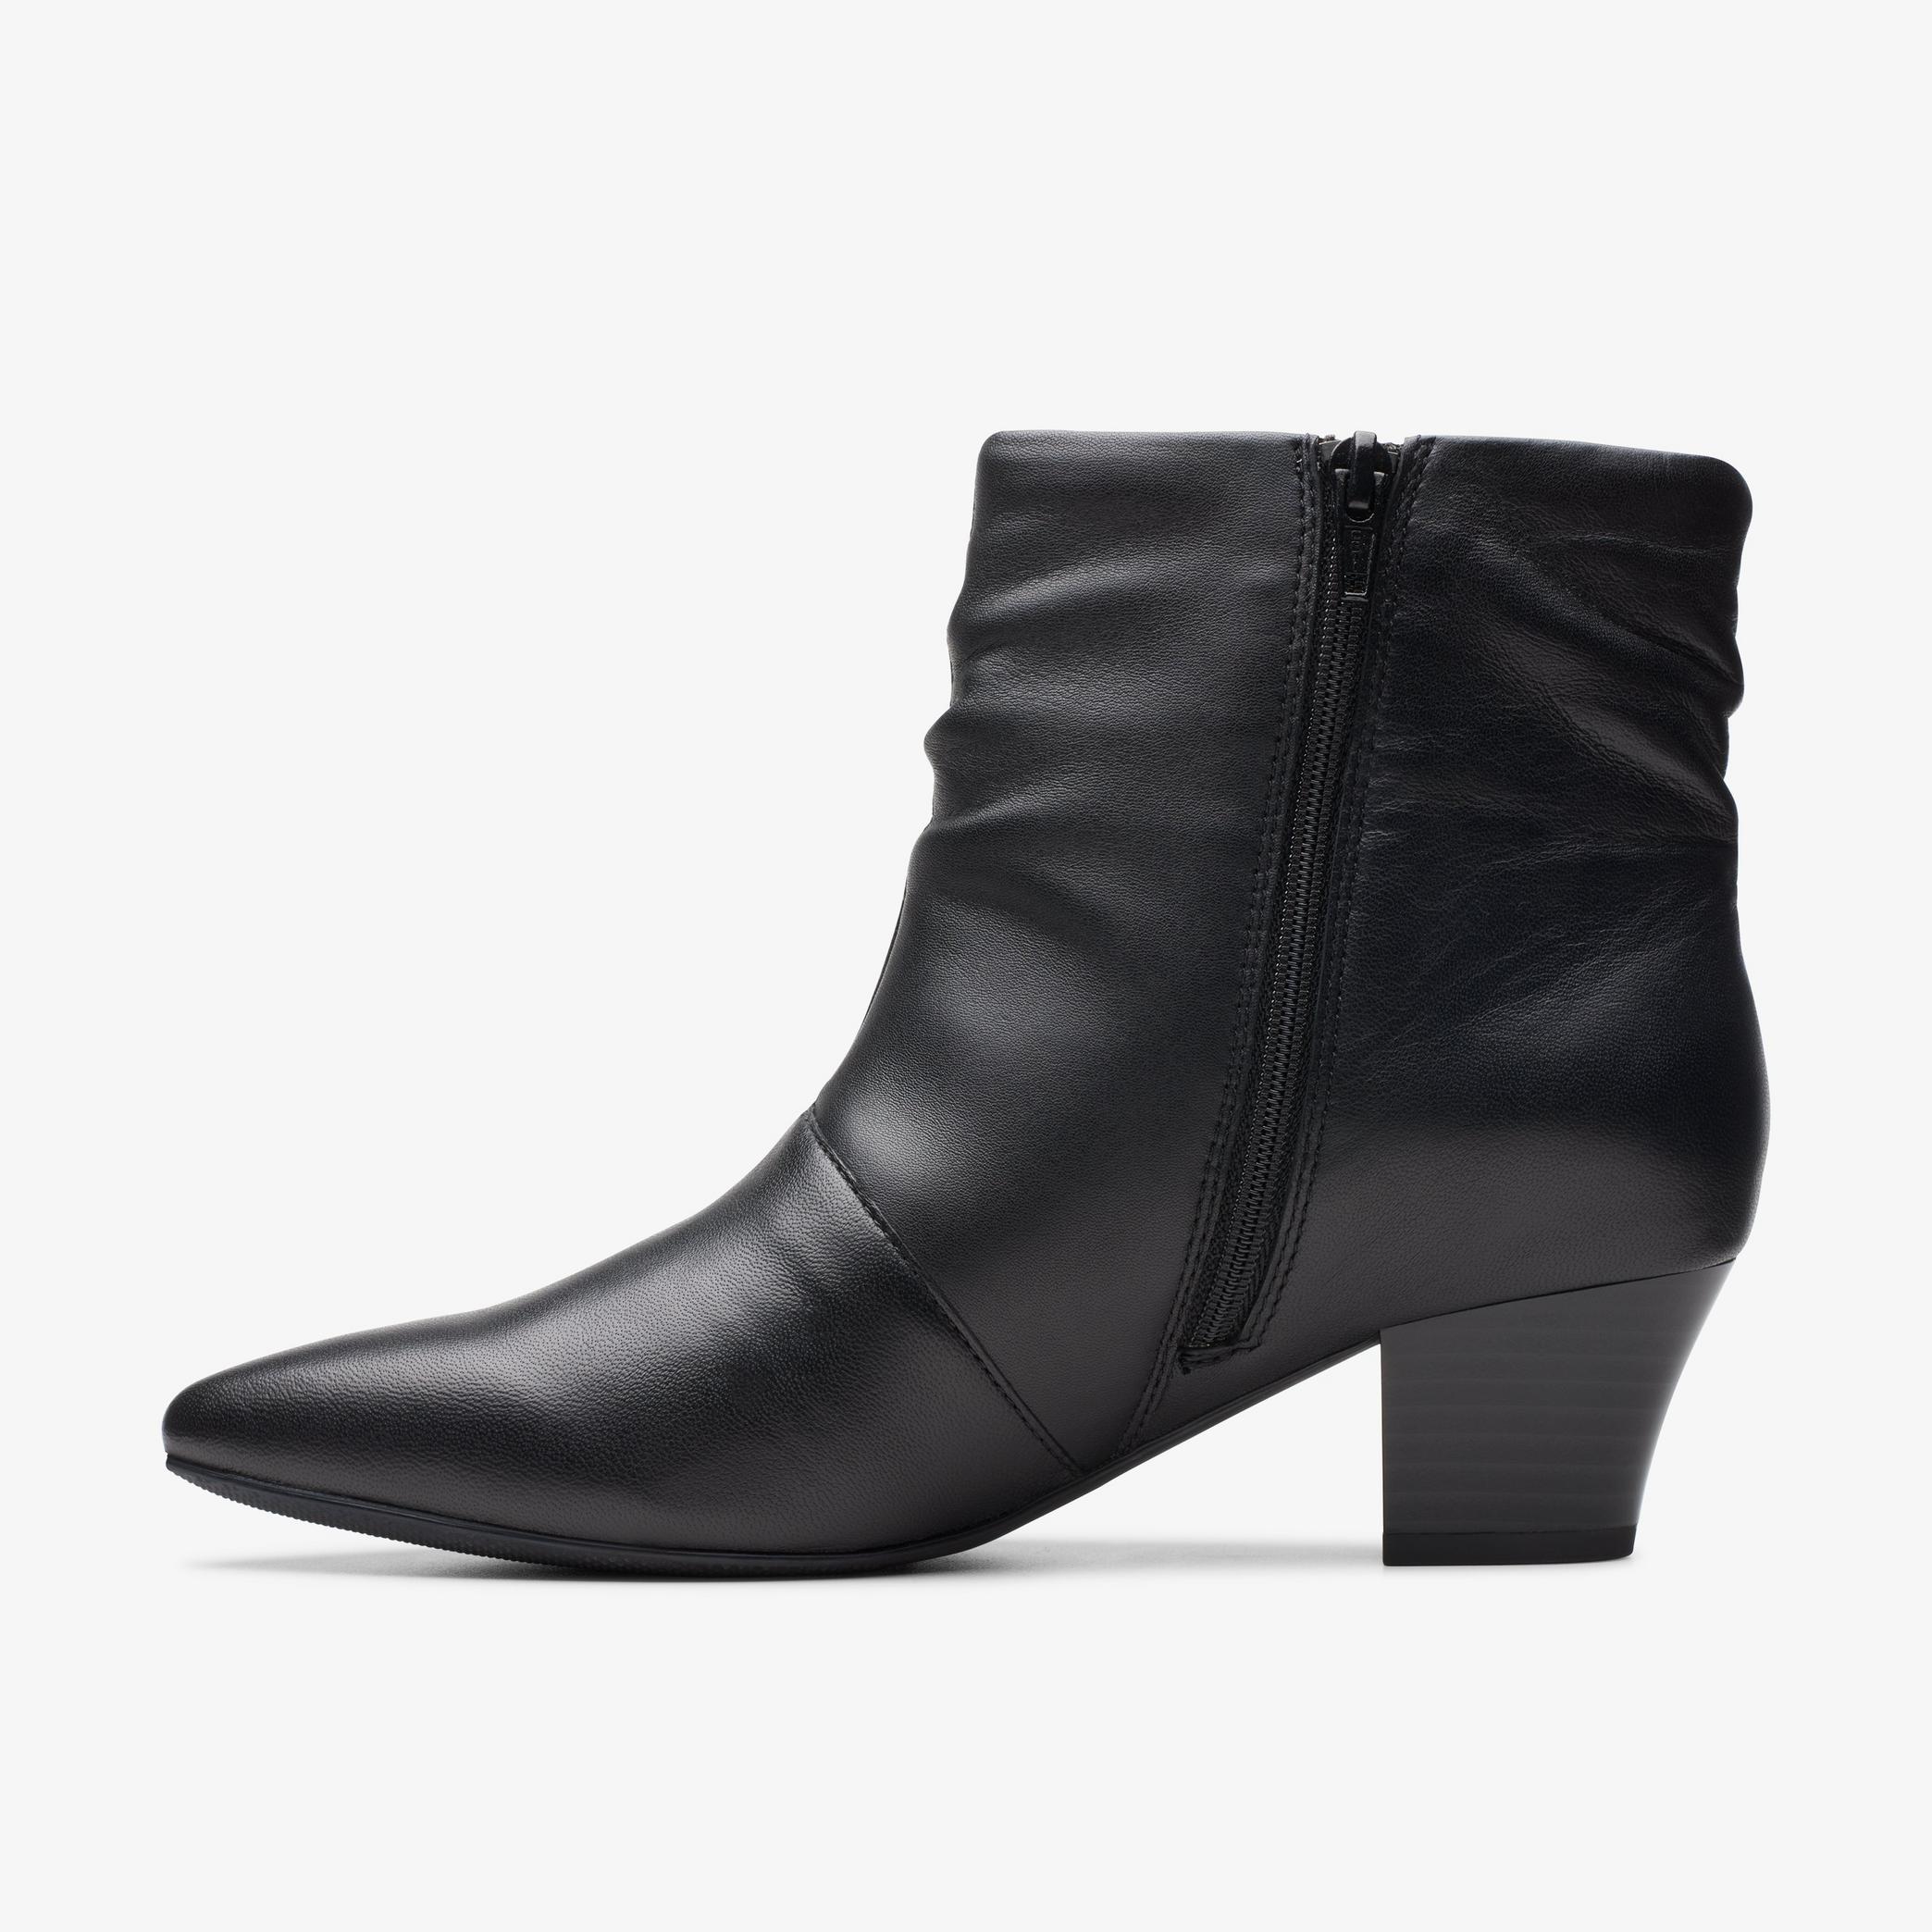 Teresa Skip Black Leather Ankle Boots, view 2 of 6